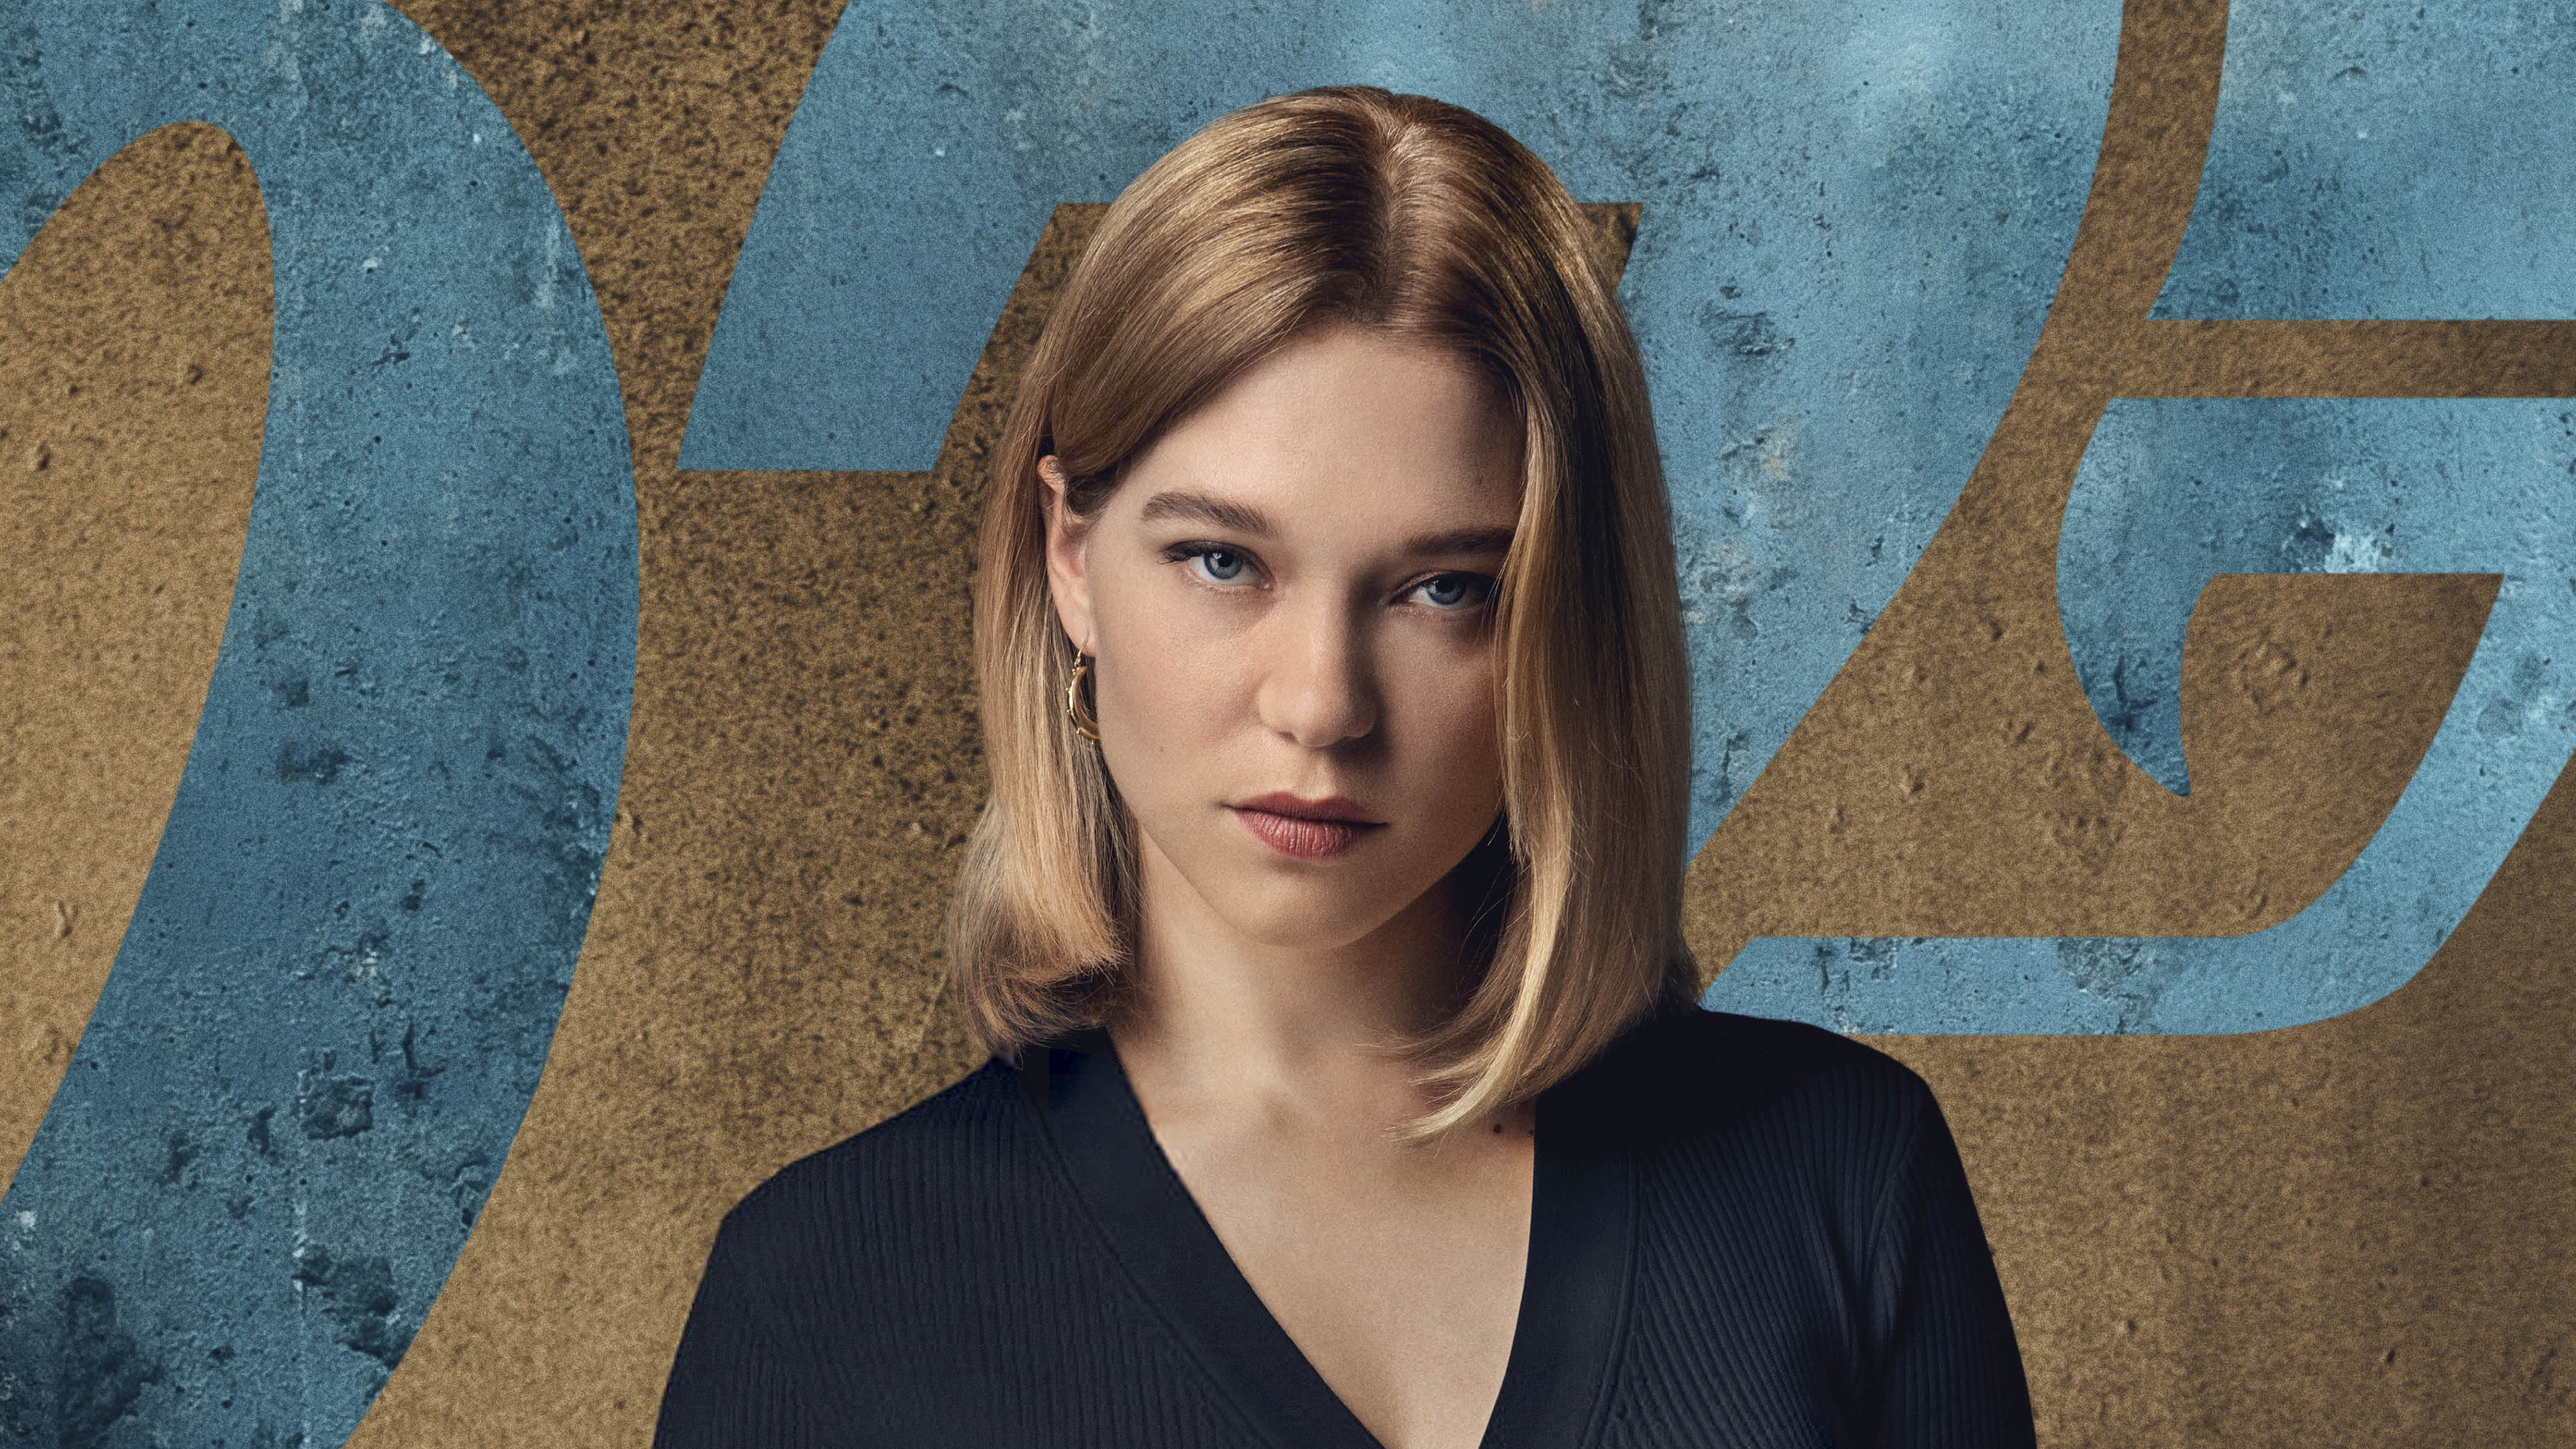 Lea Seydoux From No Time To Die Bond Movie Wallpapers